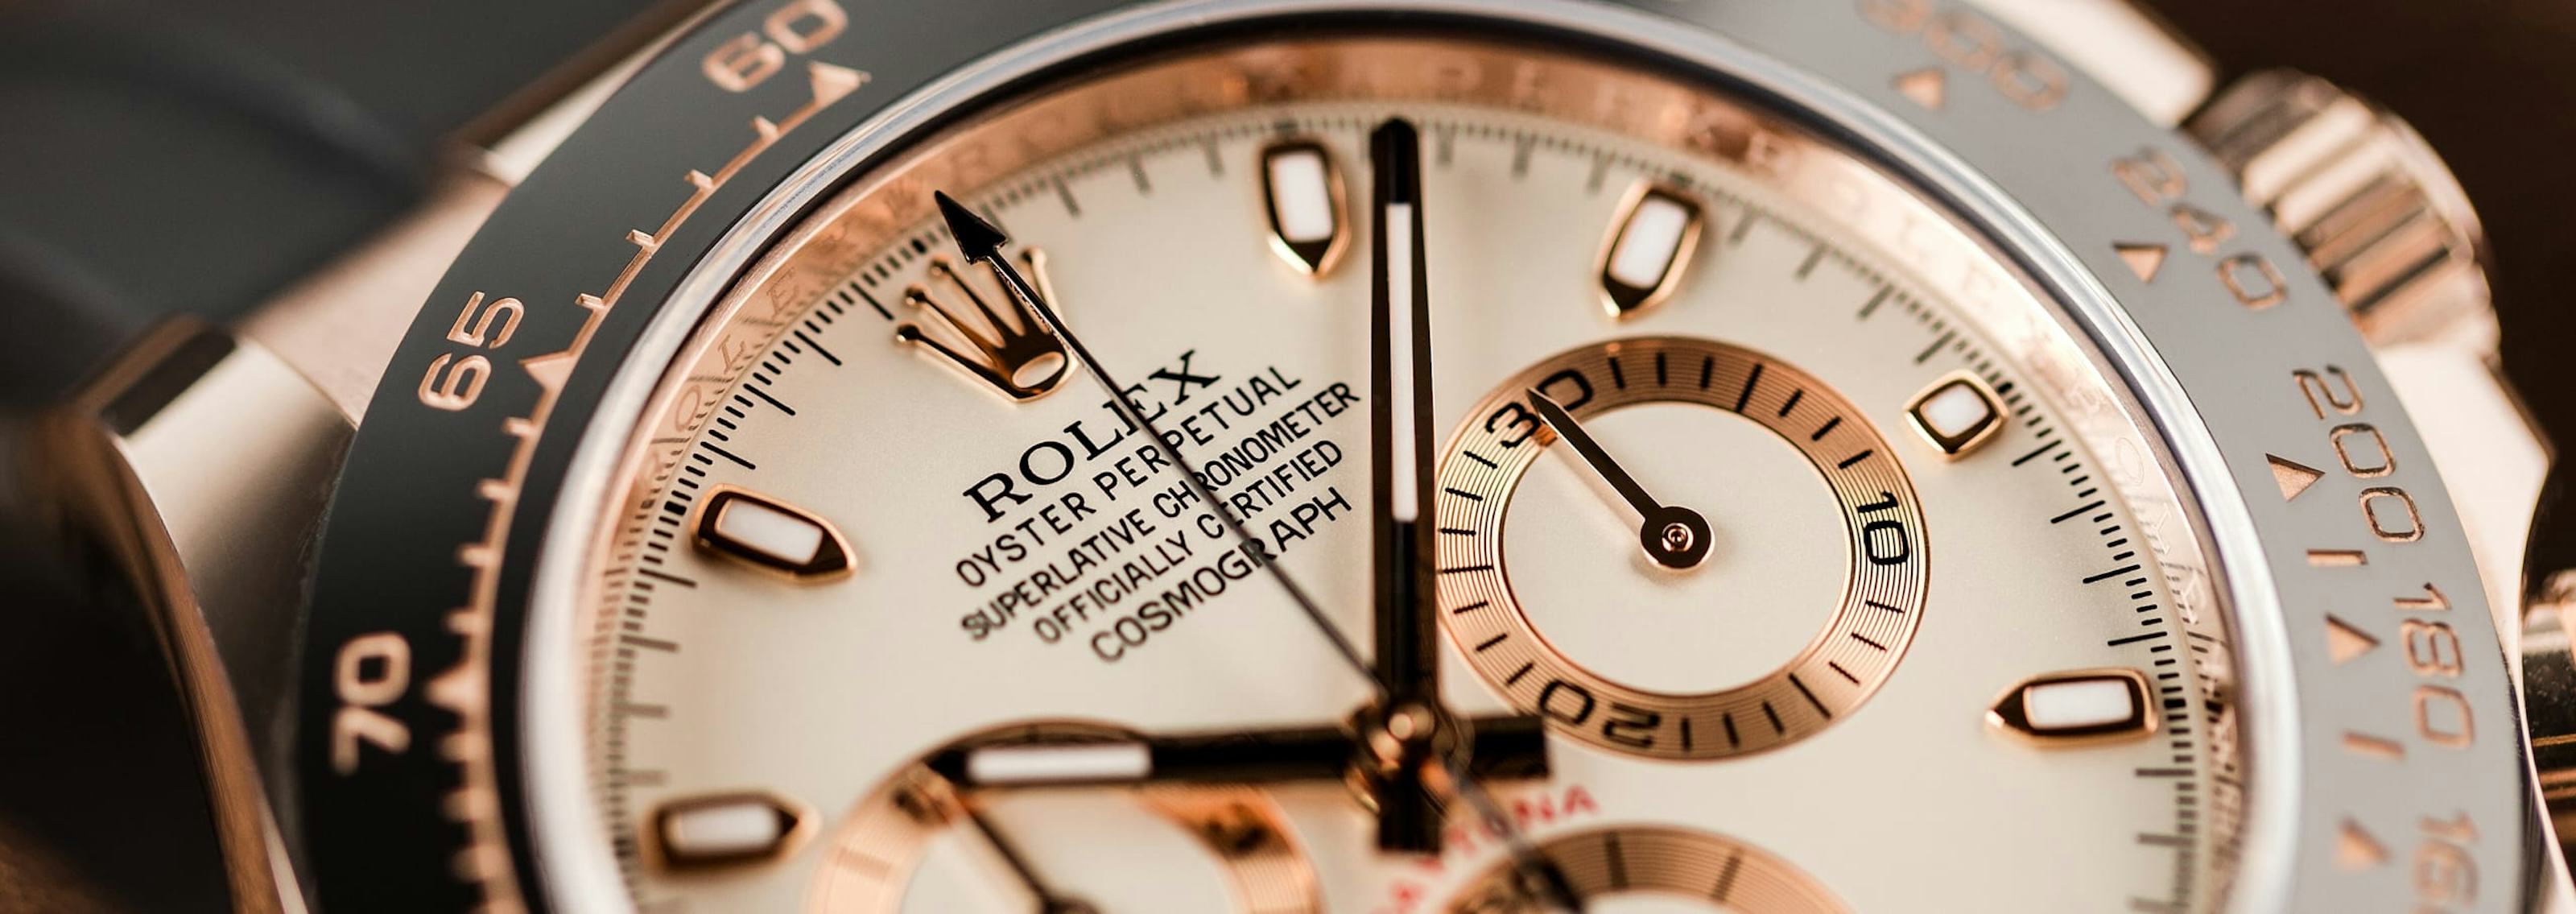 Proprietary Rolex Materials: What Do They All Mean?